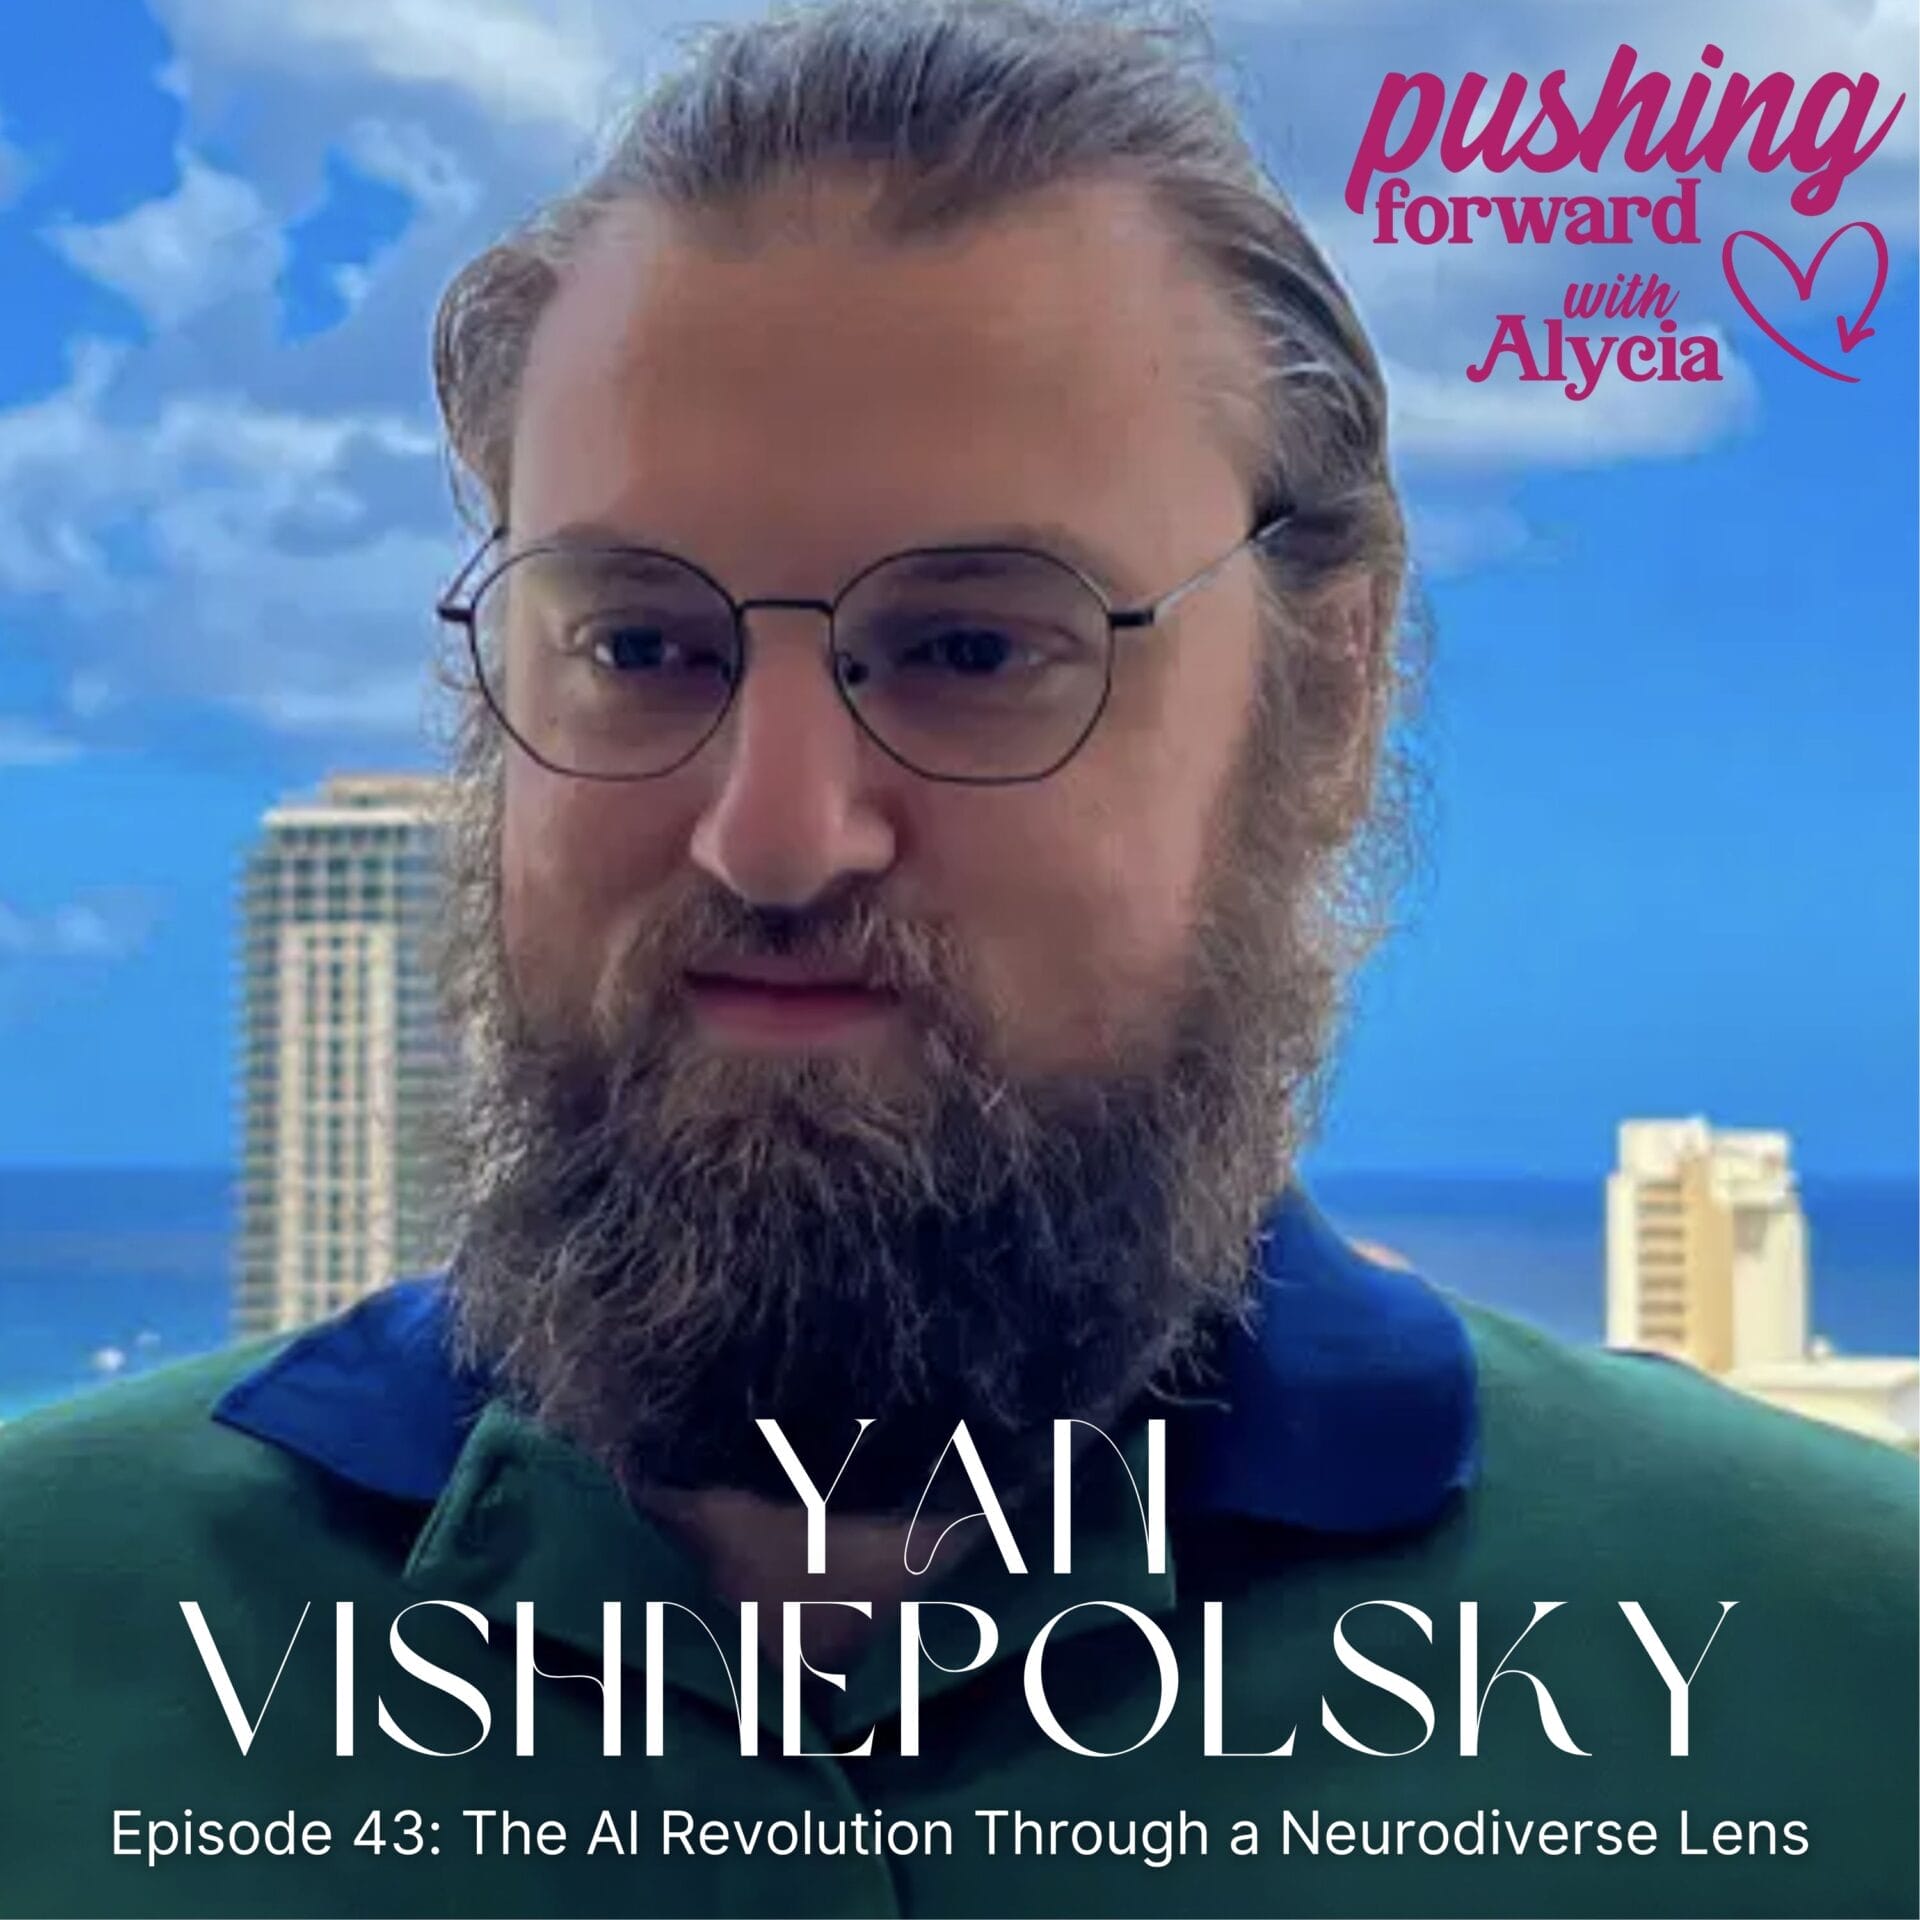 yan vishnepolsky on pushing forward with alycia episode forty three artificial intelligence and neurodiversity